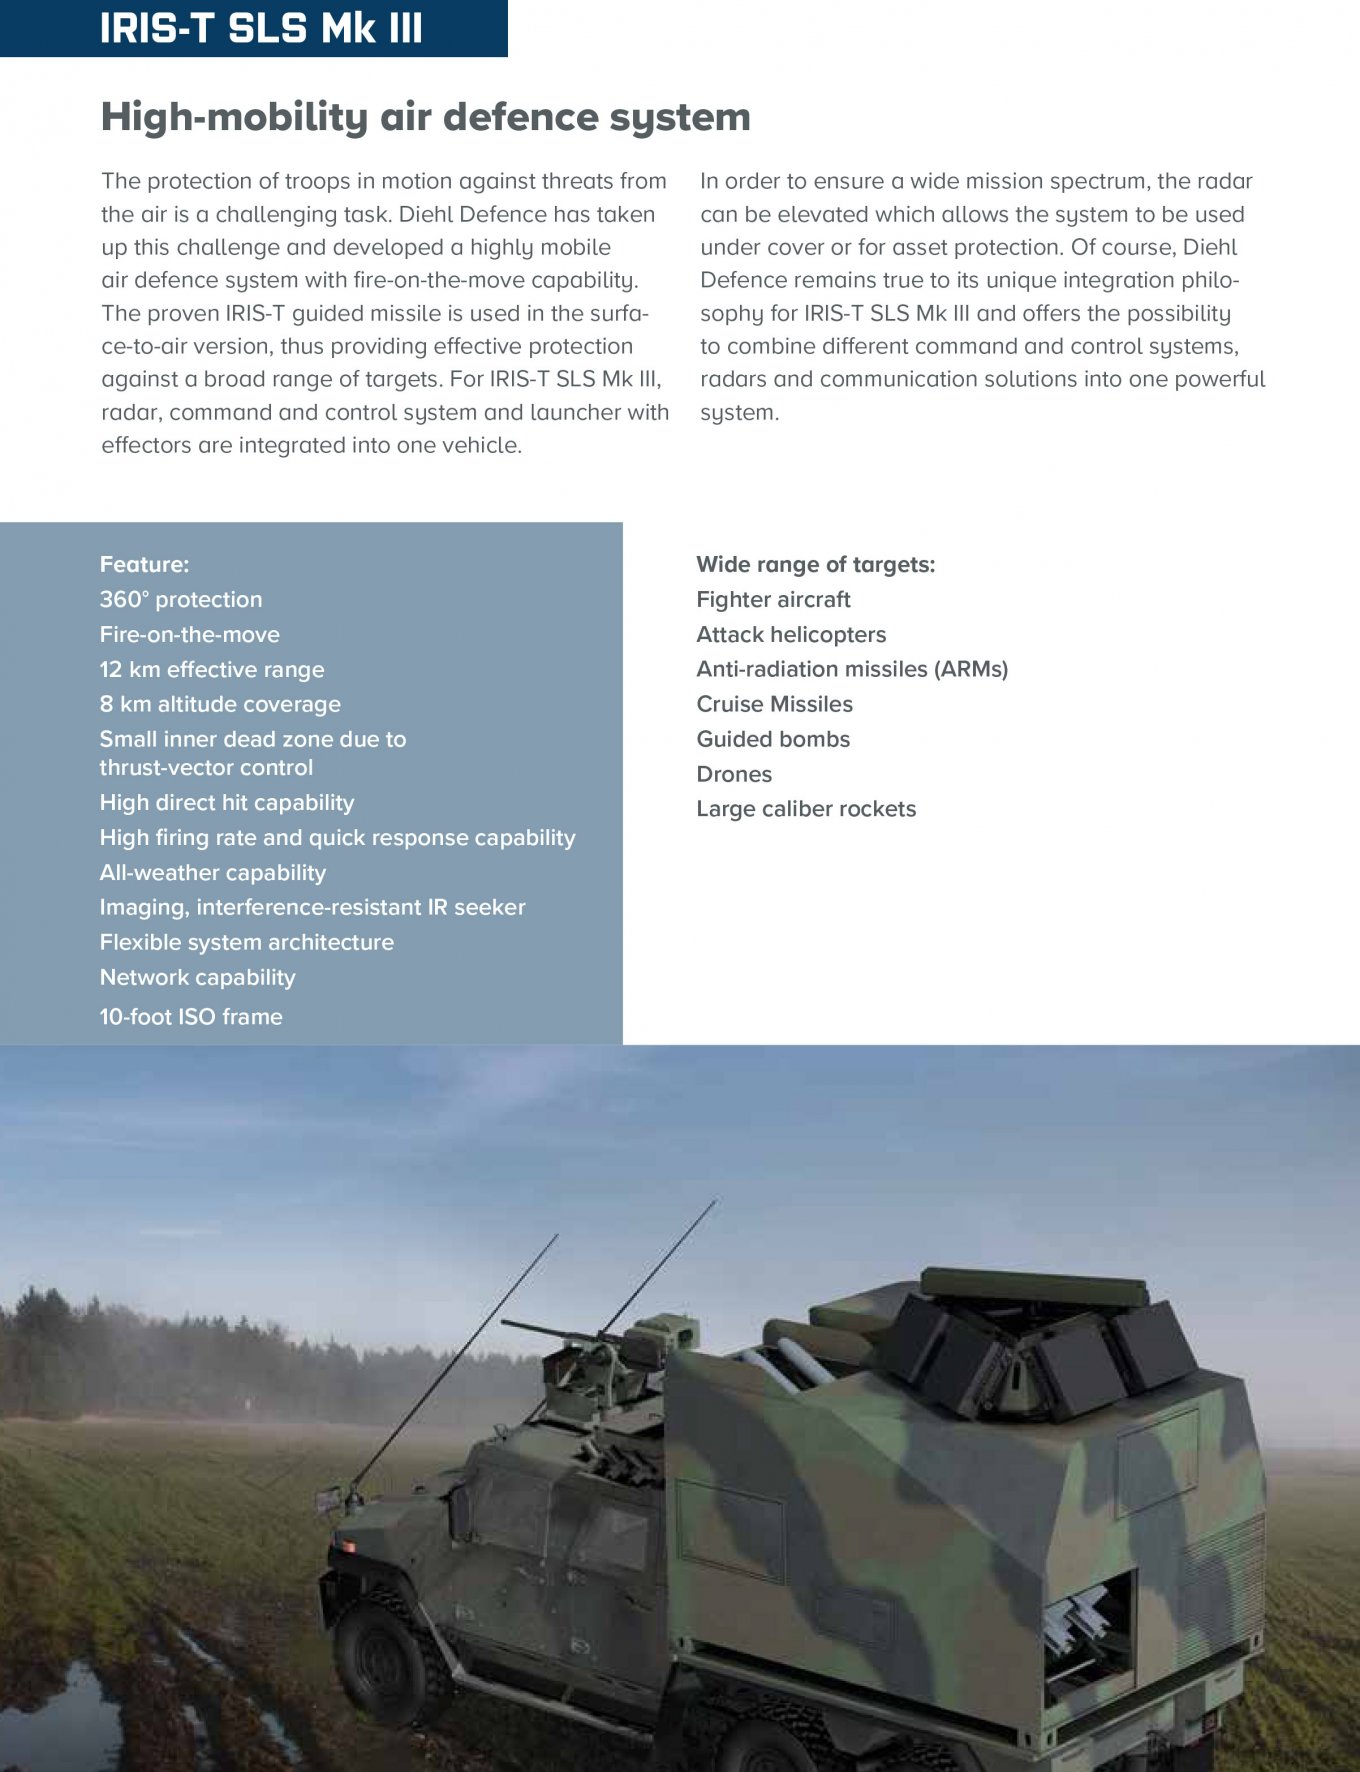 IRIS-T SLS Mk III from the Diehl Defense product catalog, Germany Specifies the Weapons It Is Transferring to Ukraine in Record Aid Package Worth €2.7 bin, Defense Express